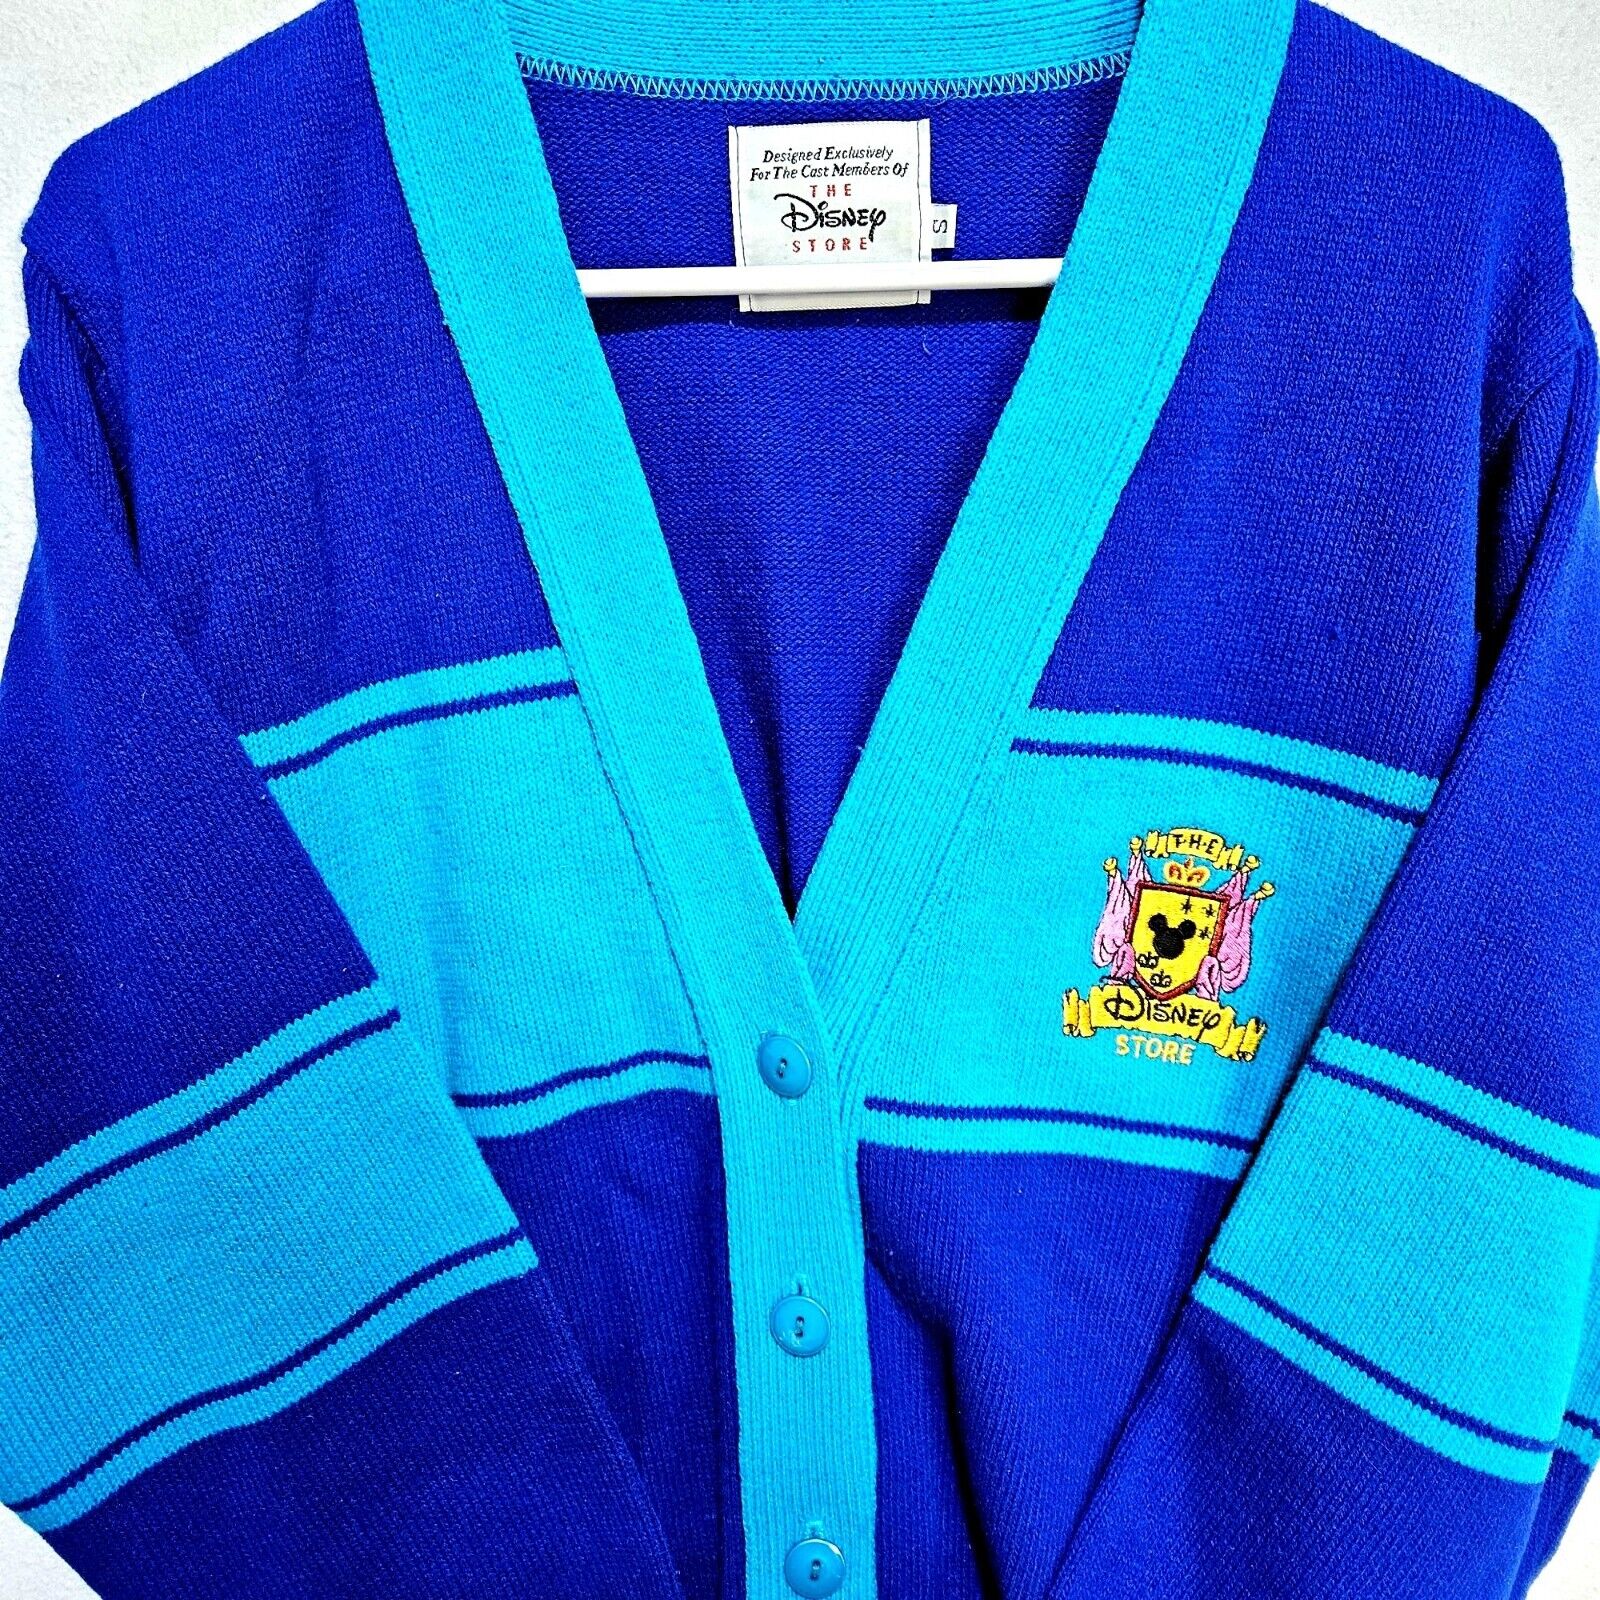 Disney Store Cast Member Cardigan Sweater Mens S Blue Embroidered Vintage 90s